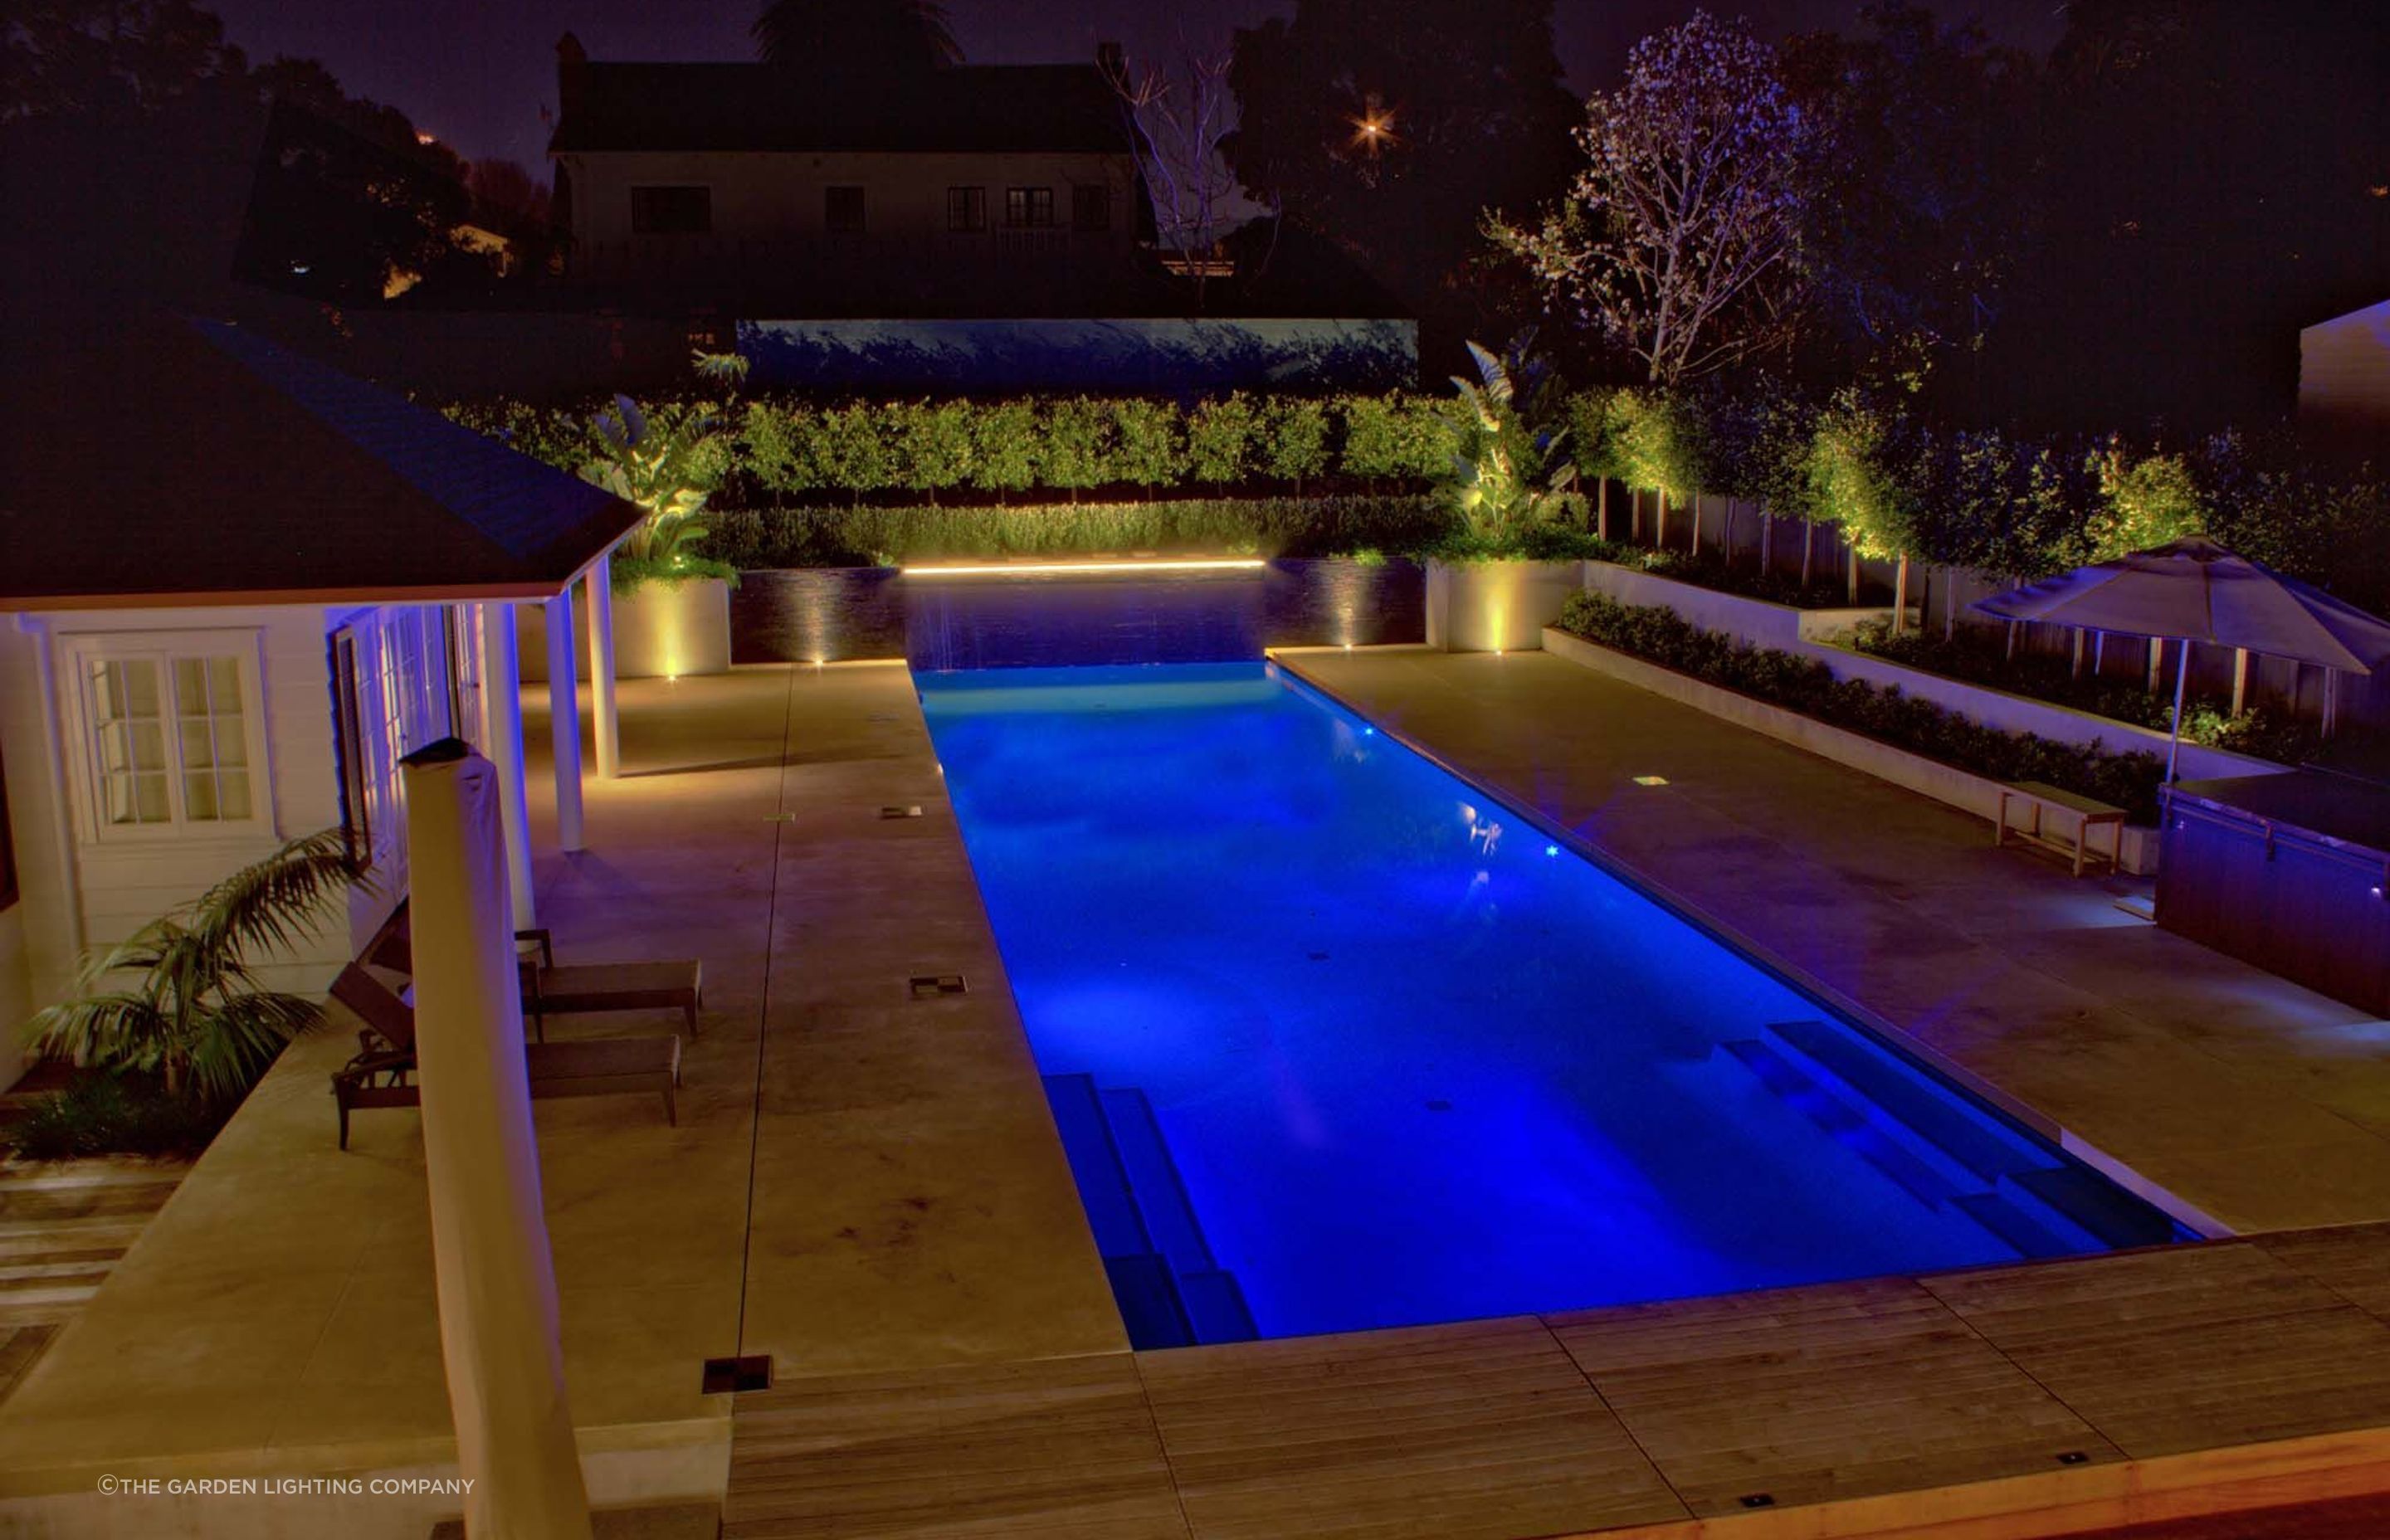 Coloured lighting can make a pool glow with stylish energy.